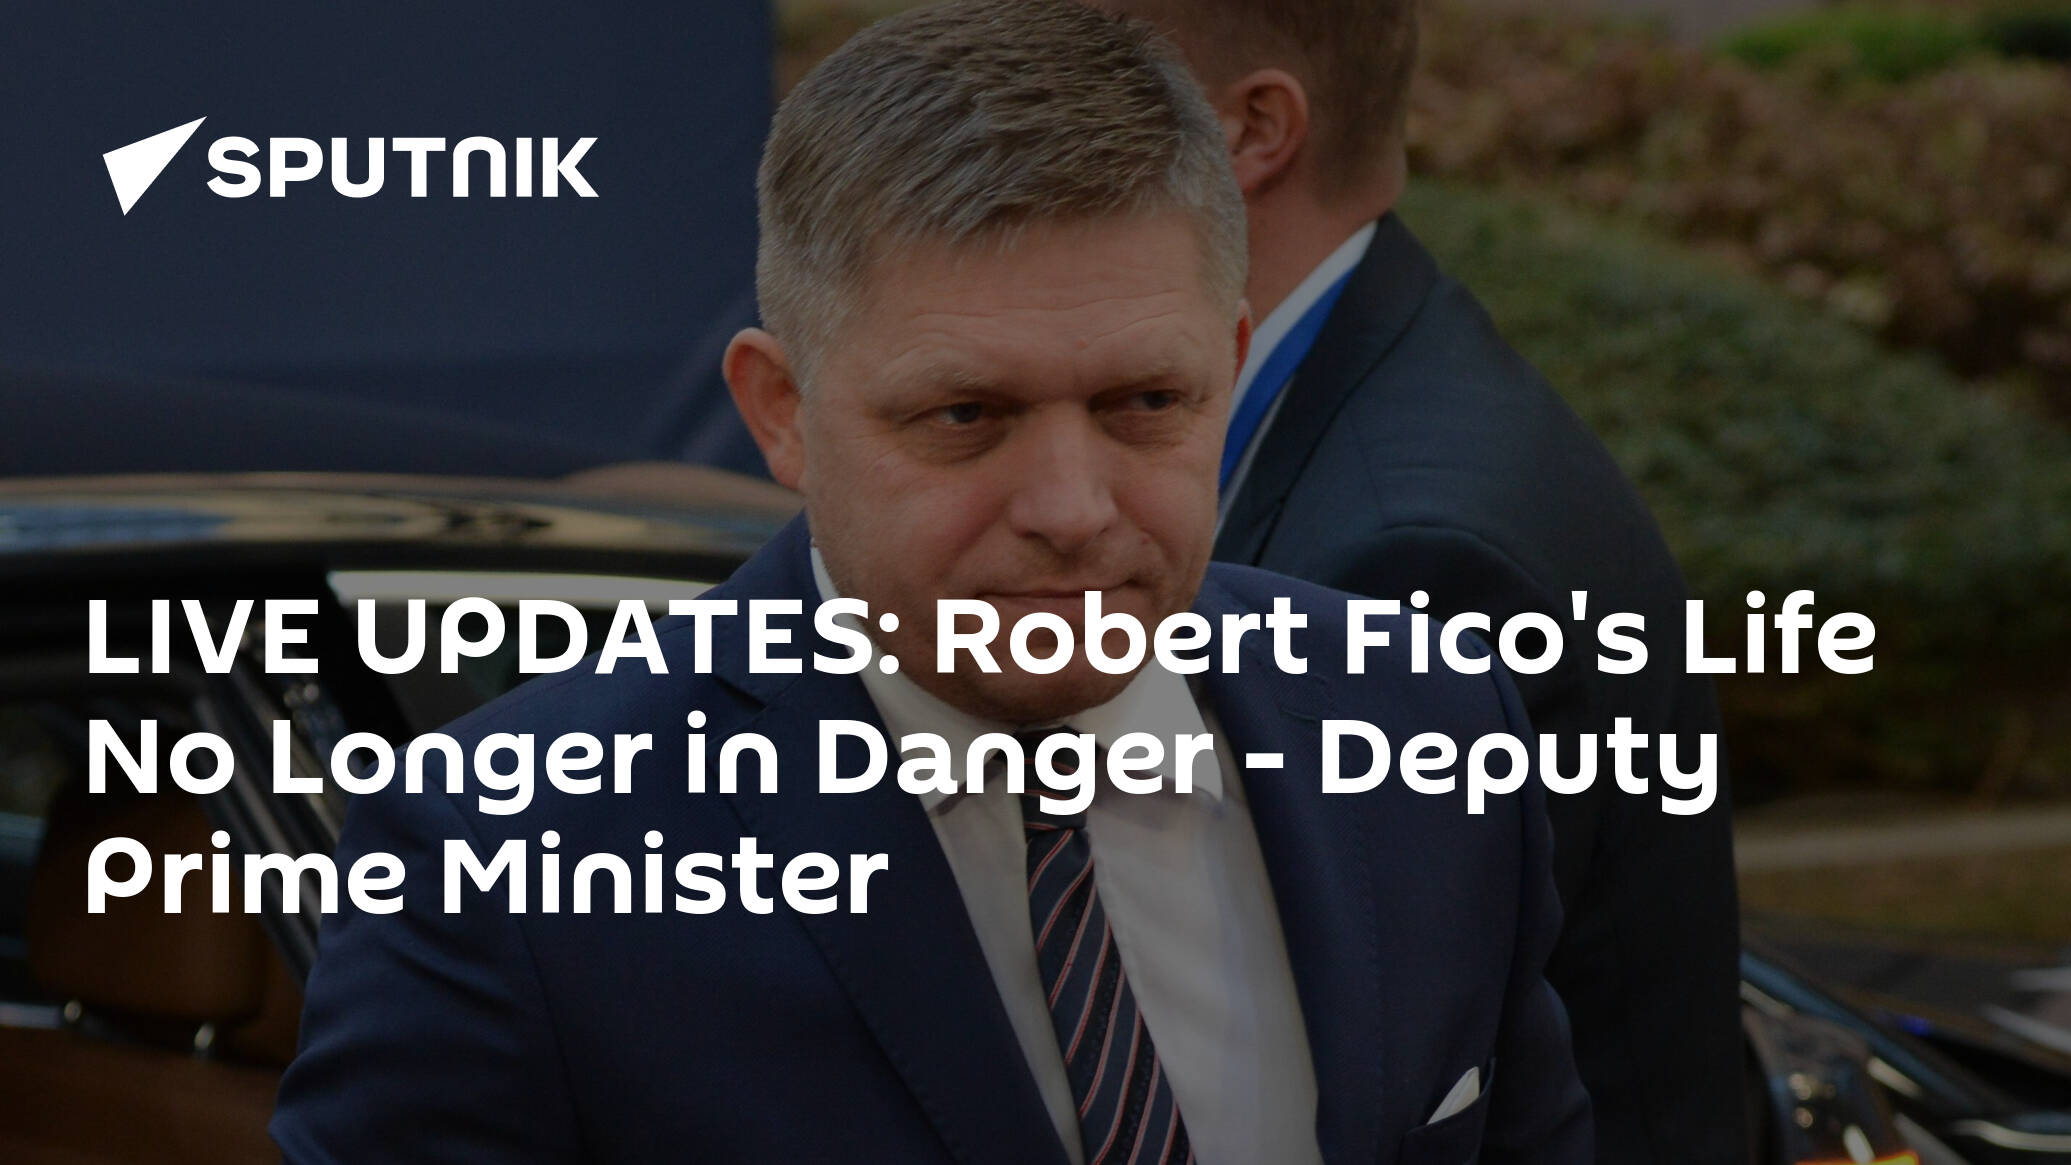 Slovak Prime Minister Fico Injured in Shooting at Offsite Cabinet Meeting